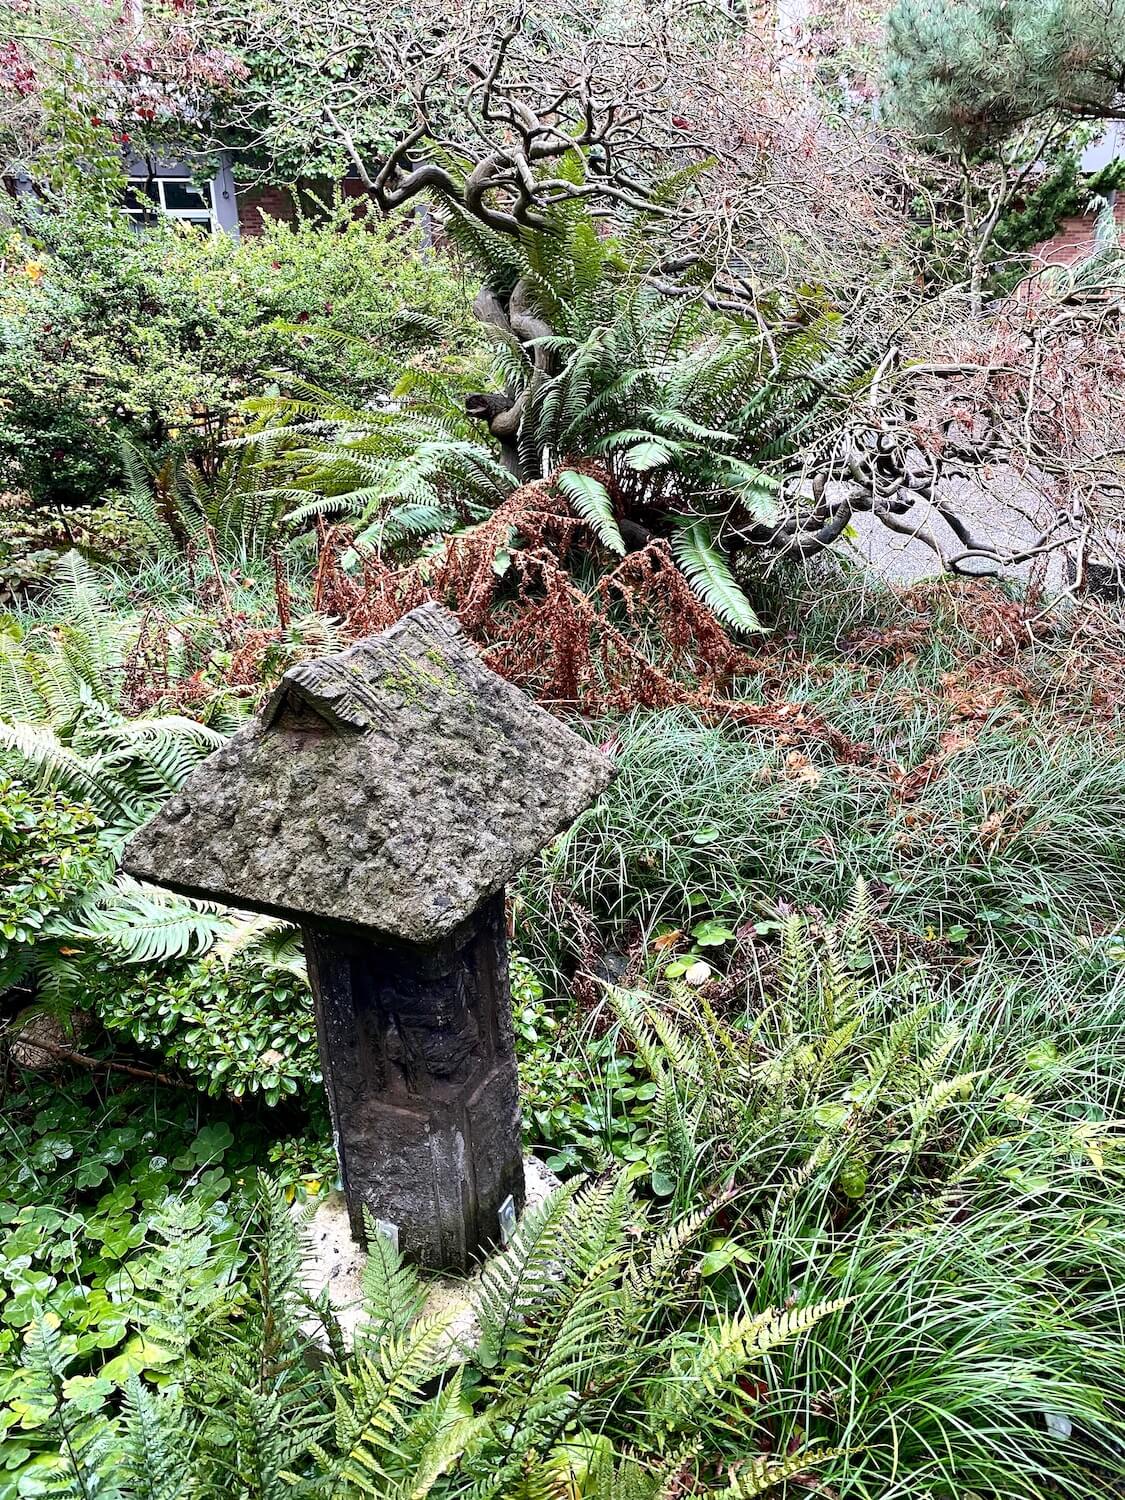 The Japanese Garden at Seattle University is an art exhibit in its own right.  Here a concrete lantern faces a snarling maple tree dormant in Winter with no leaves.  There are varieties of grasses and ferns filling in the space in the garden.  